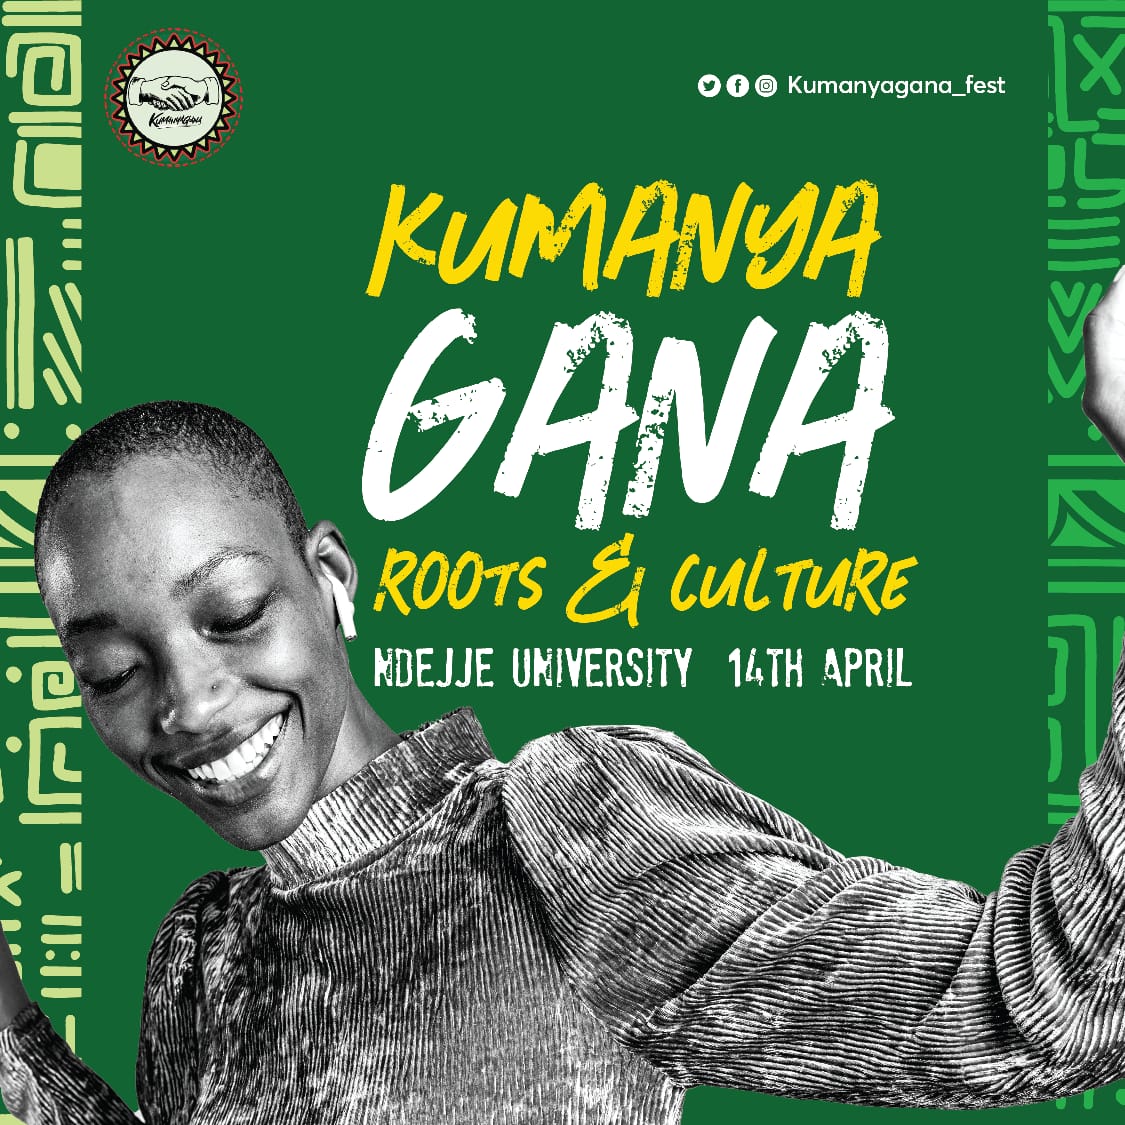 Ndejje University here we come again, #kumanyagana #RootsAndCulture  fest is heating up, 14th April is the date .. Miss if you have to 😊😊 #KumanyaGana